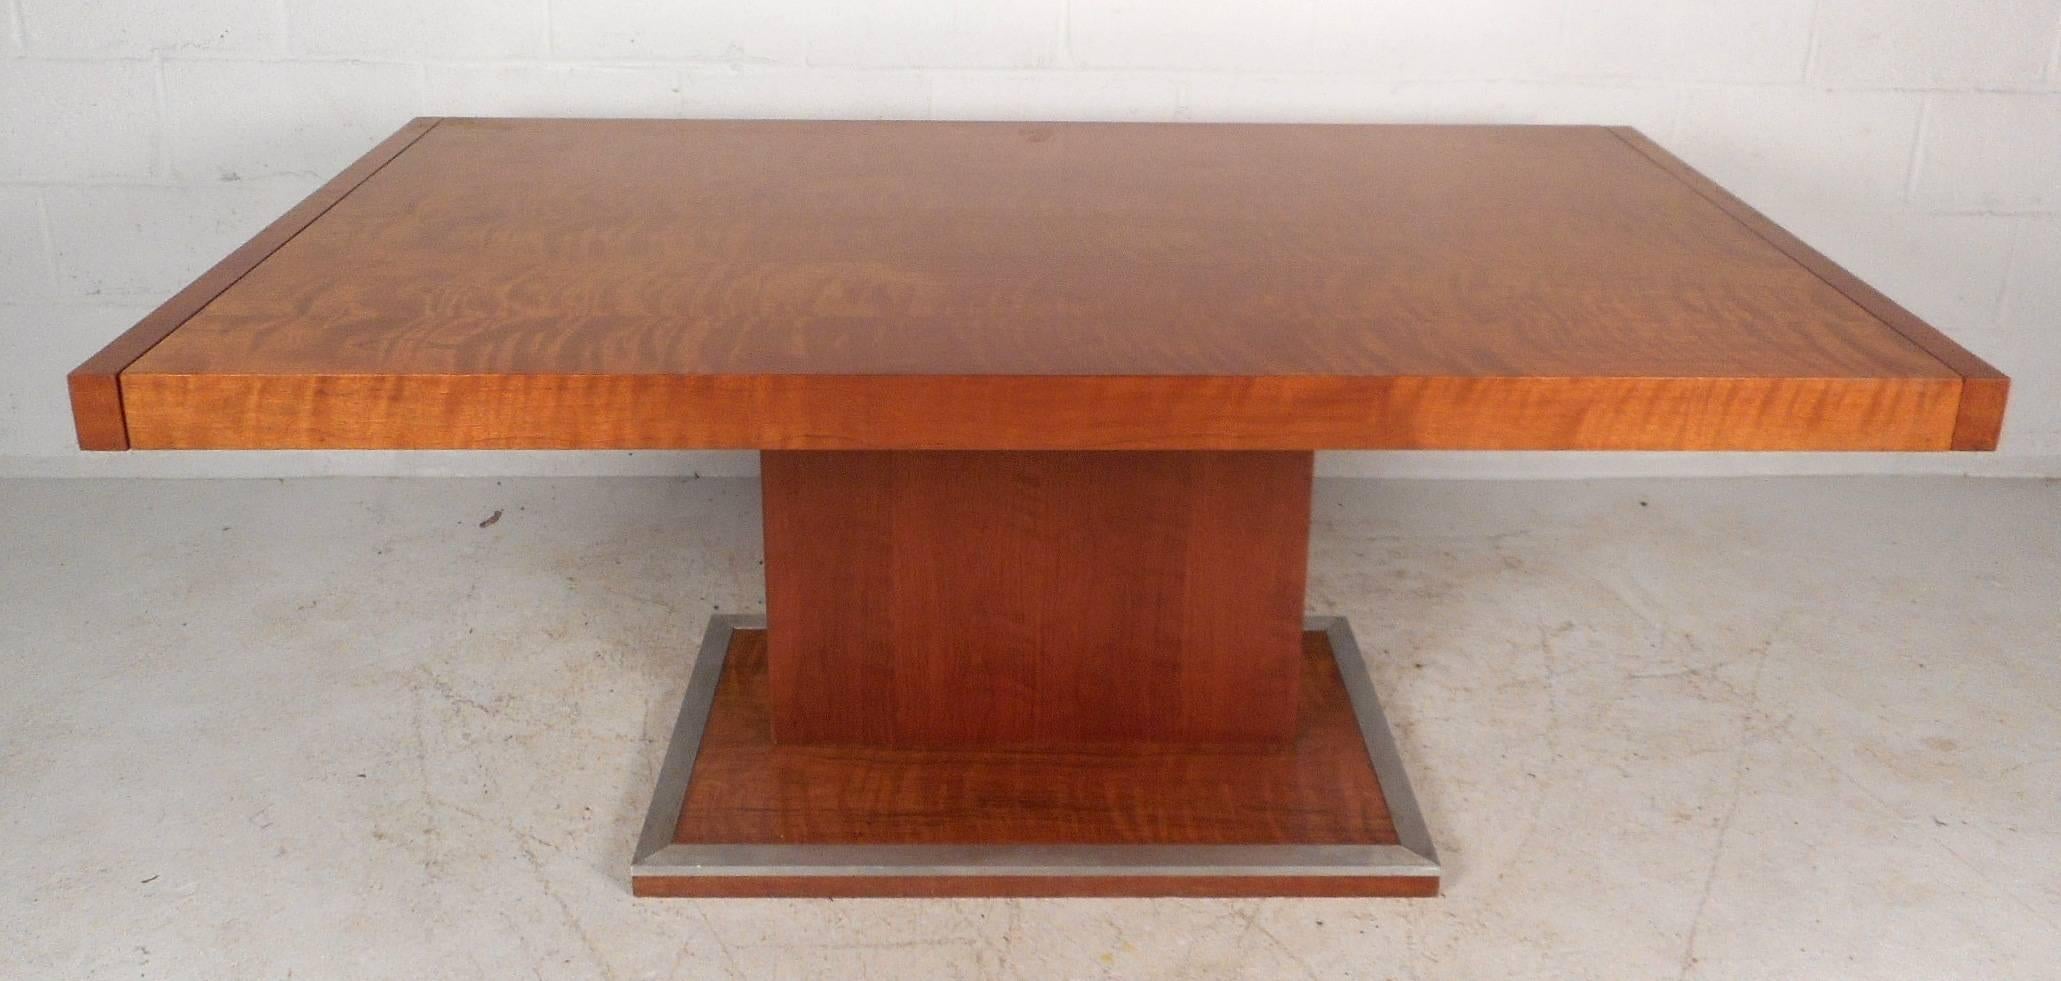 This beautiful vintage modern dining table is made of burl maple wood and includes two leaves that easily insert on each end. Unique floating top design with a stylish and sturdy pedestal style base outlined in metal trim. Impressive piece goes from